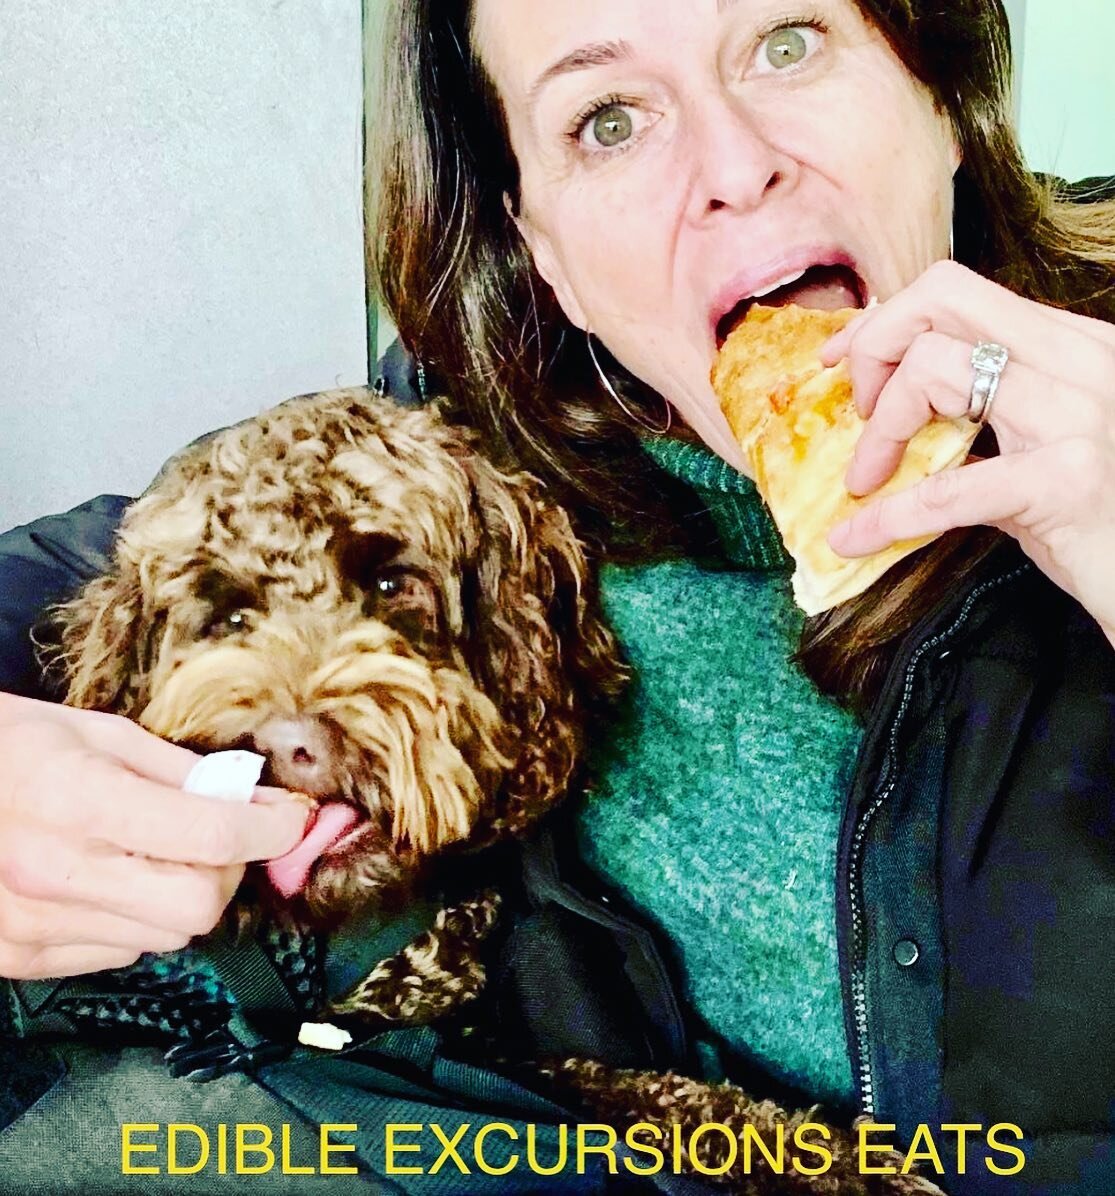 Check it out!  Edible Excursions Eats is a new monthly feature from your favorite food tour guides. You can read all about it on our blog.  A few favorites from last month:  @automat_sf @hummusbodega @matchacafemaiko @damansarasf @modern.mixologist #